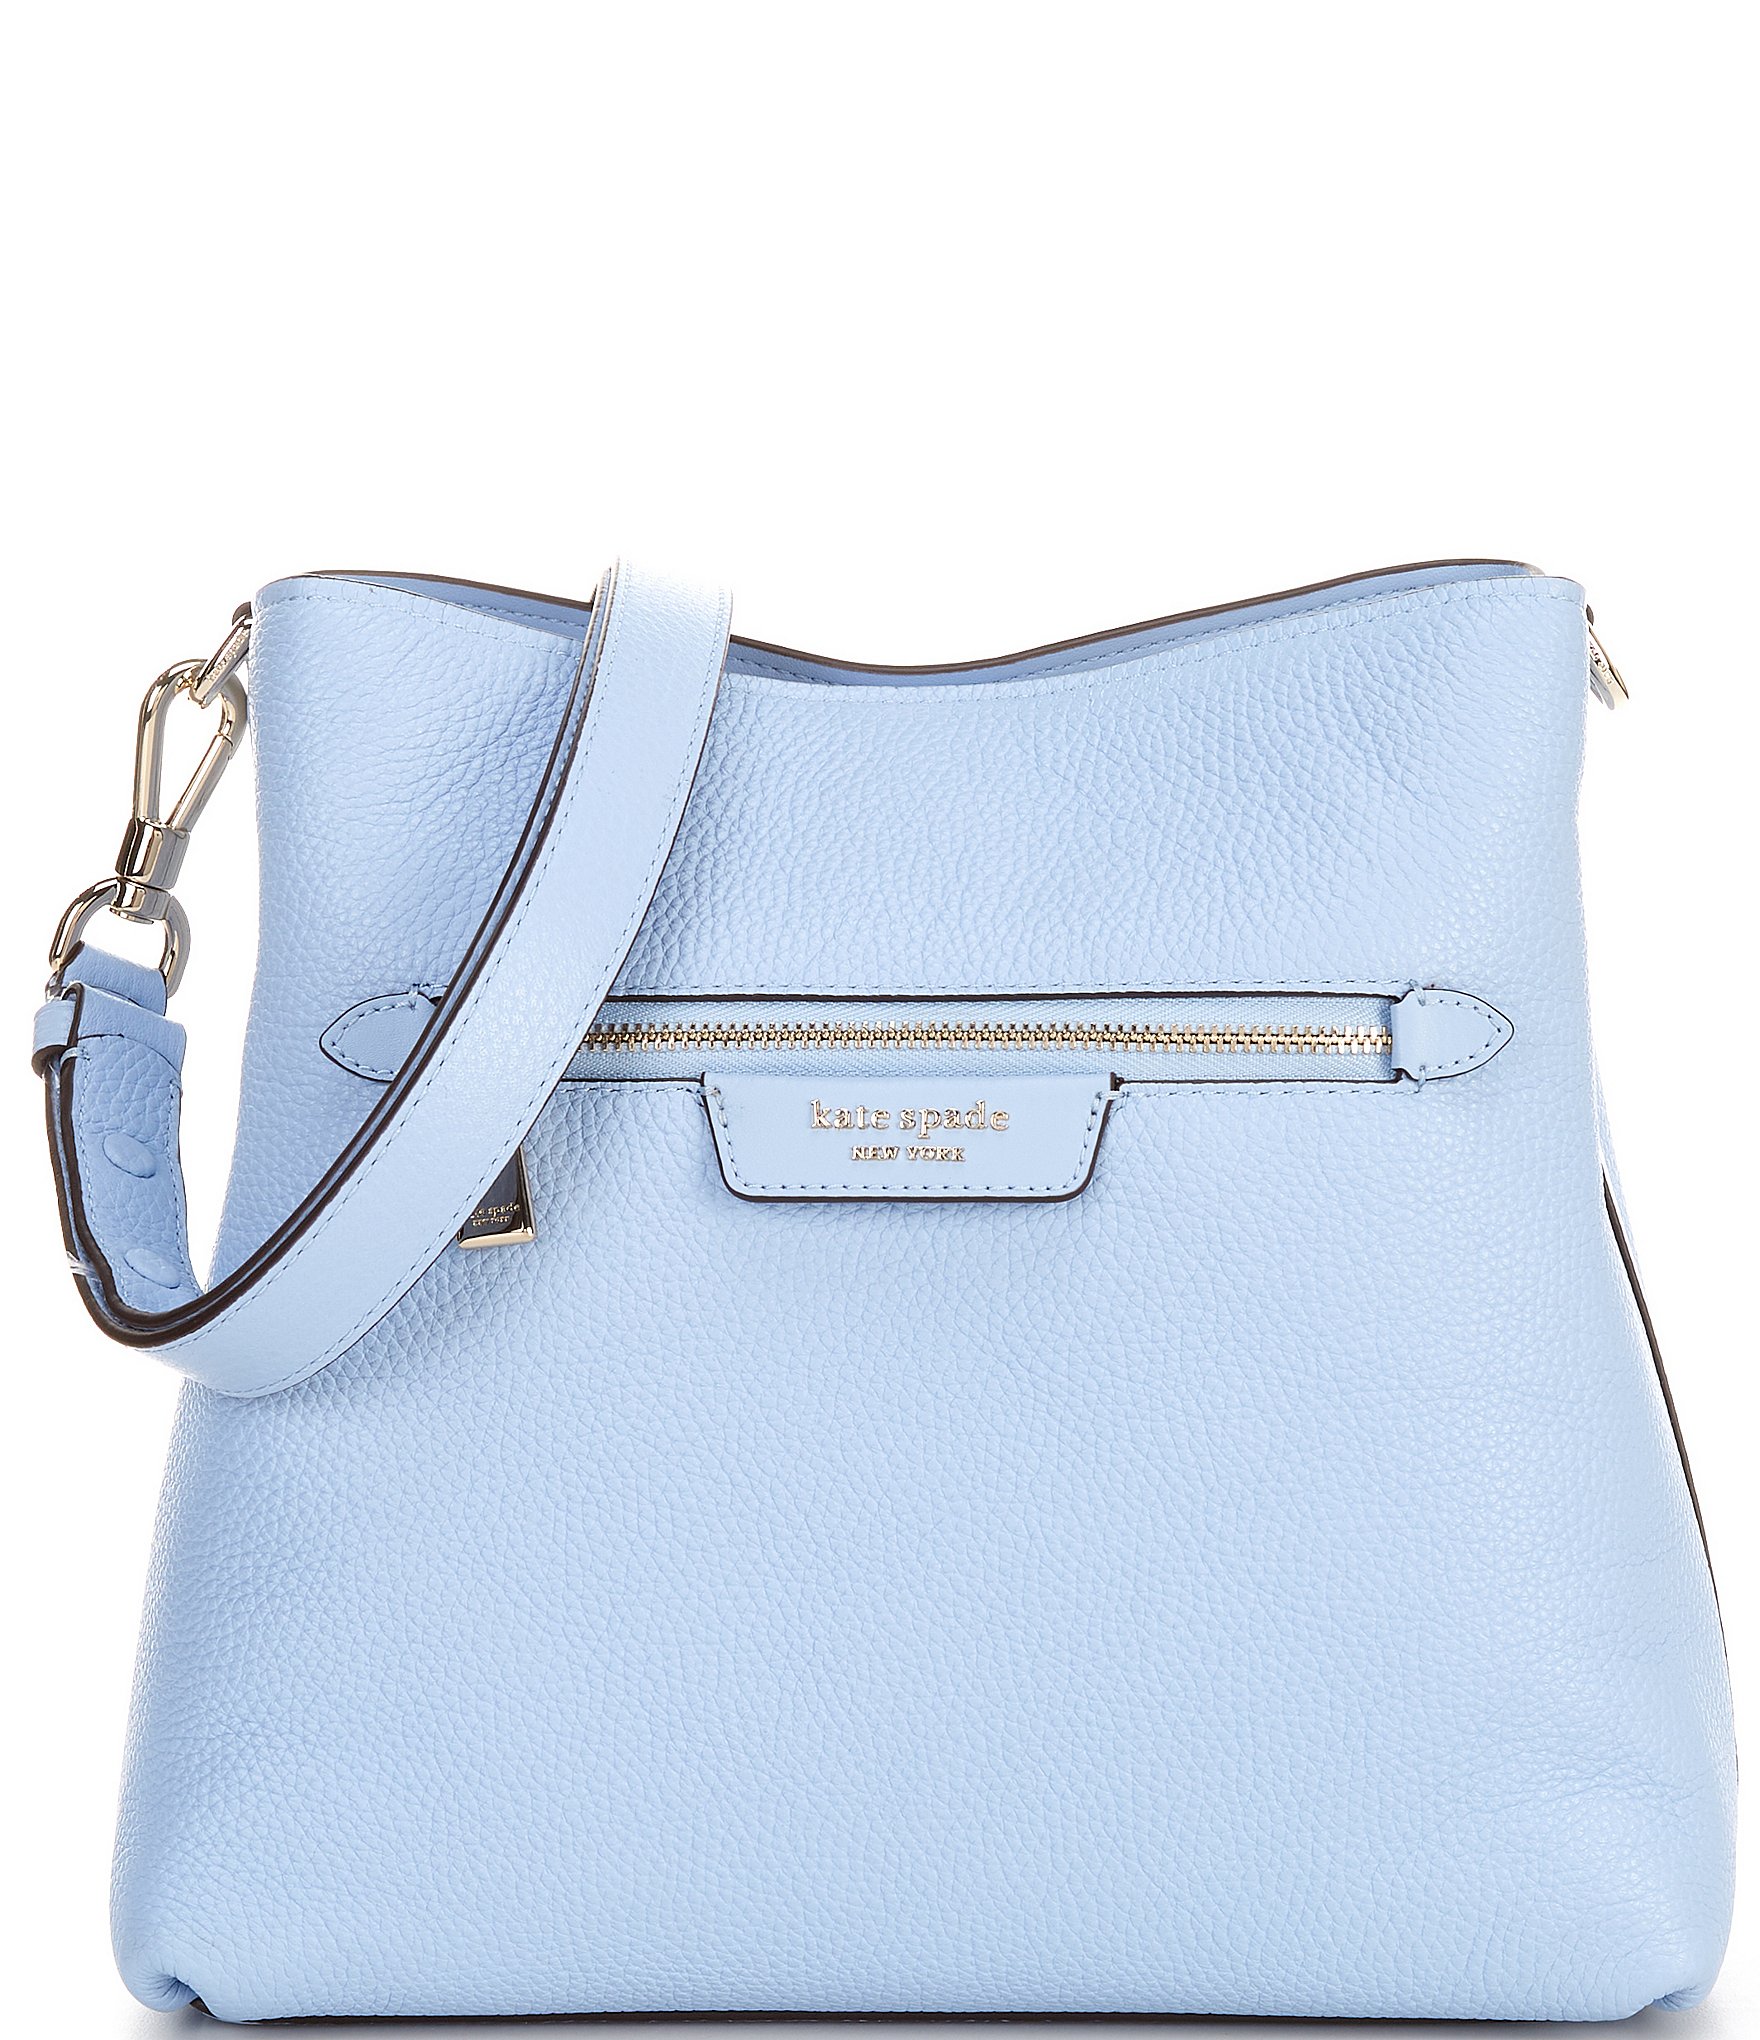 Kate Spade Surprise Days: Save Up to 80% on Backpacks, Purses & More